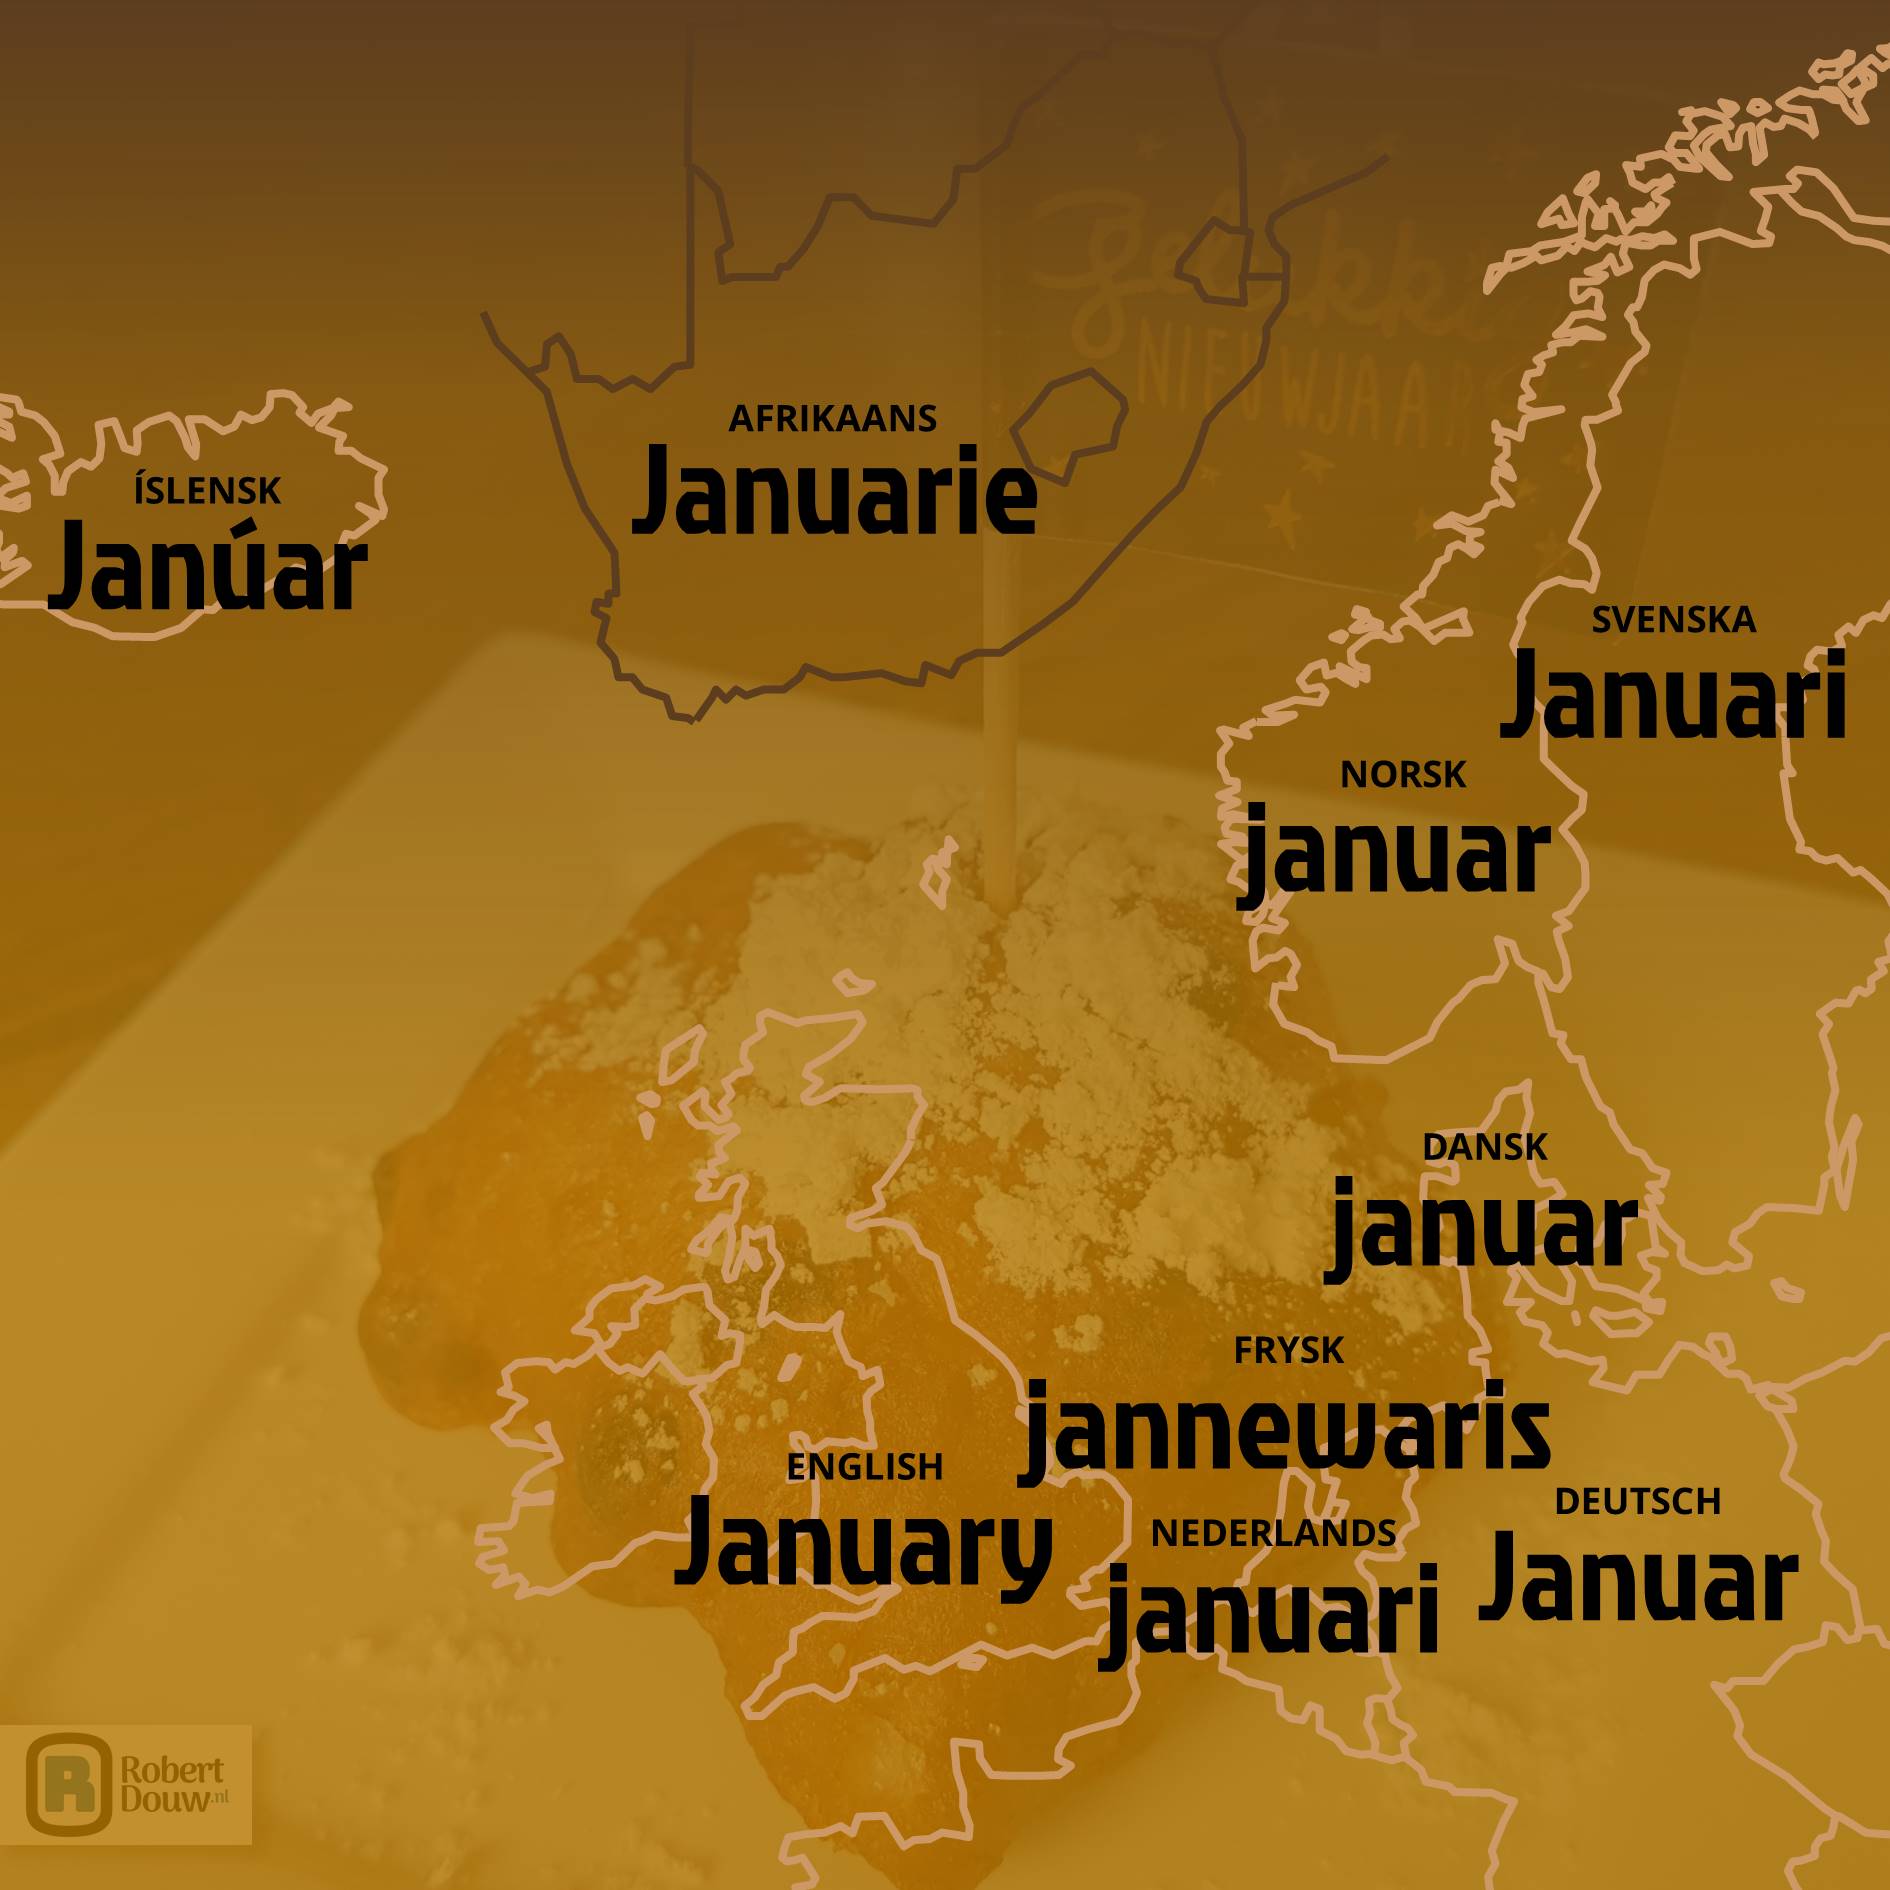 'January' in nine languages.